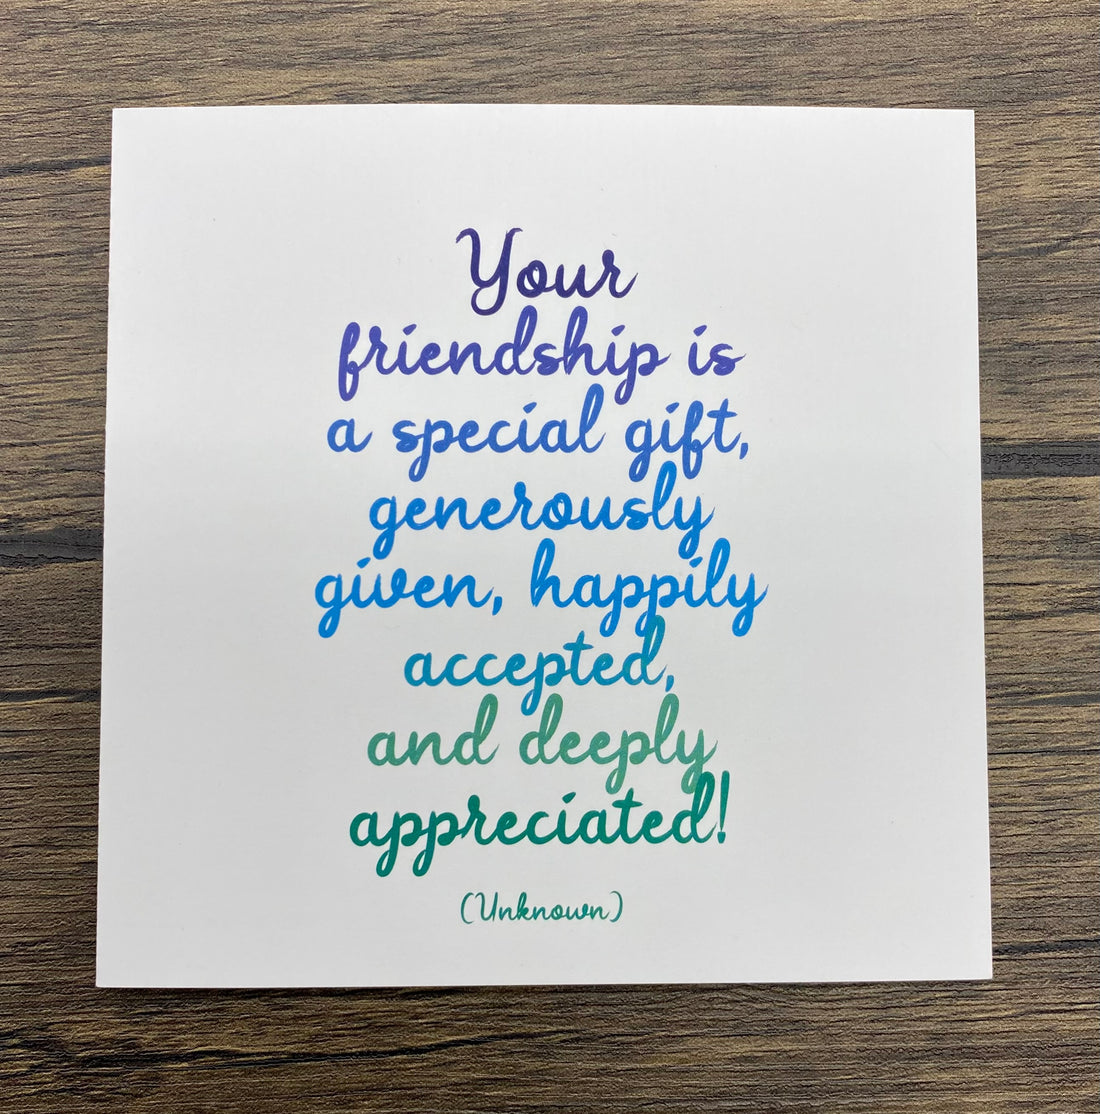 Quotable Card: Your friendship is...